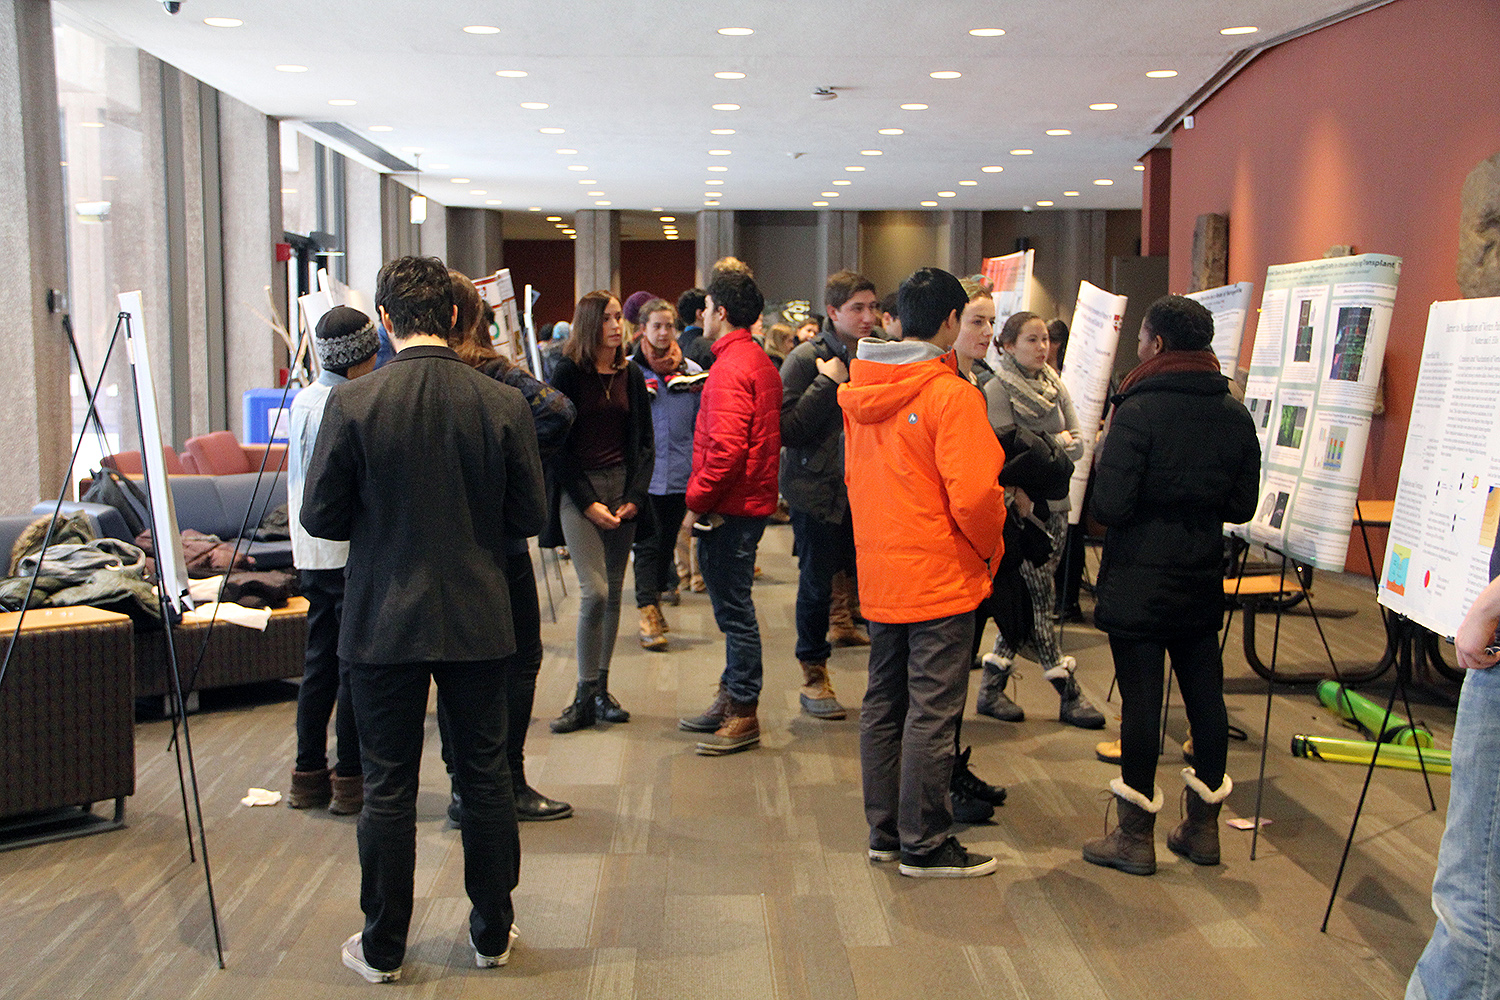 During an undergraduate poster session on Jan. 23, Wesleyan students shared their research with aspiring students interested in finding a research group.